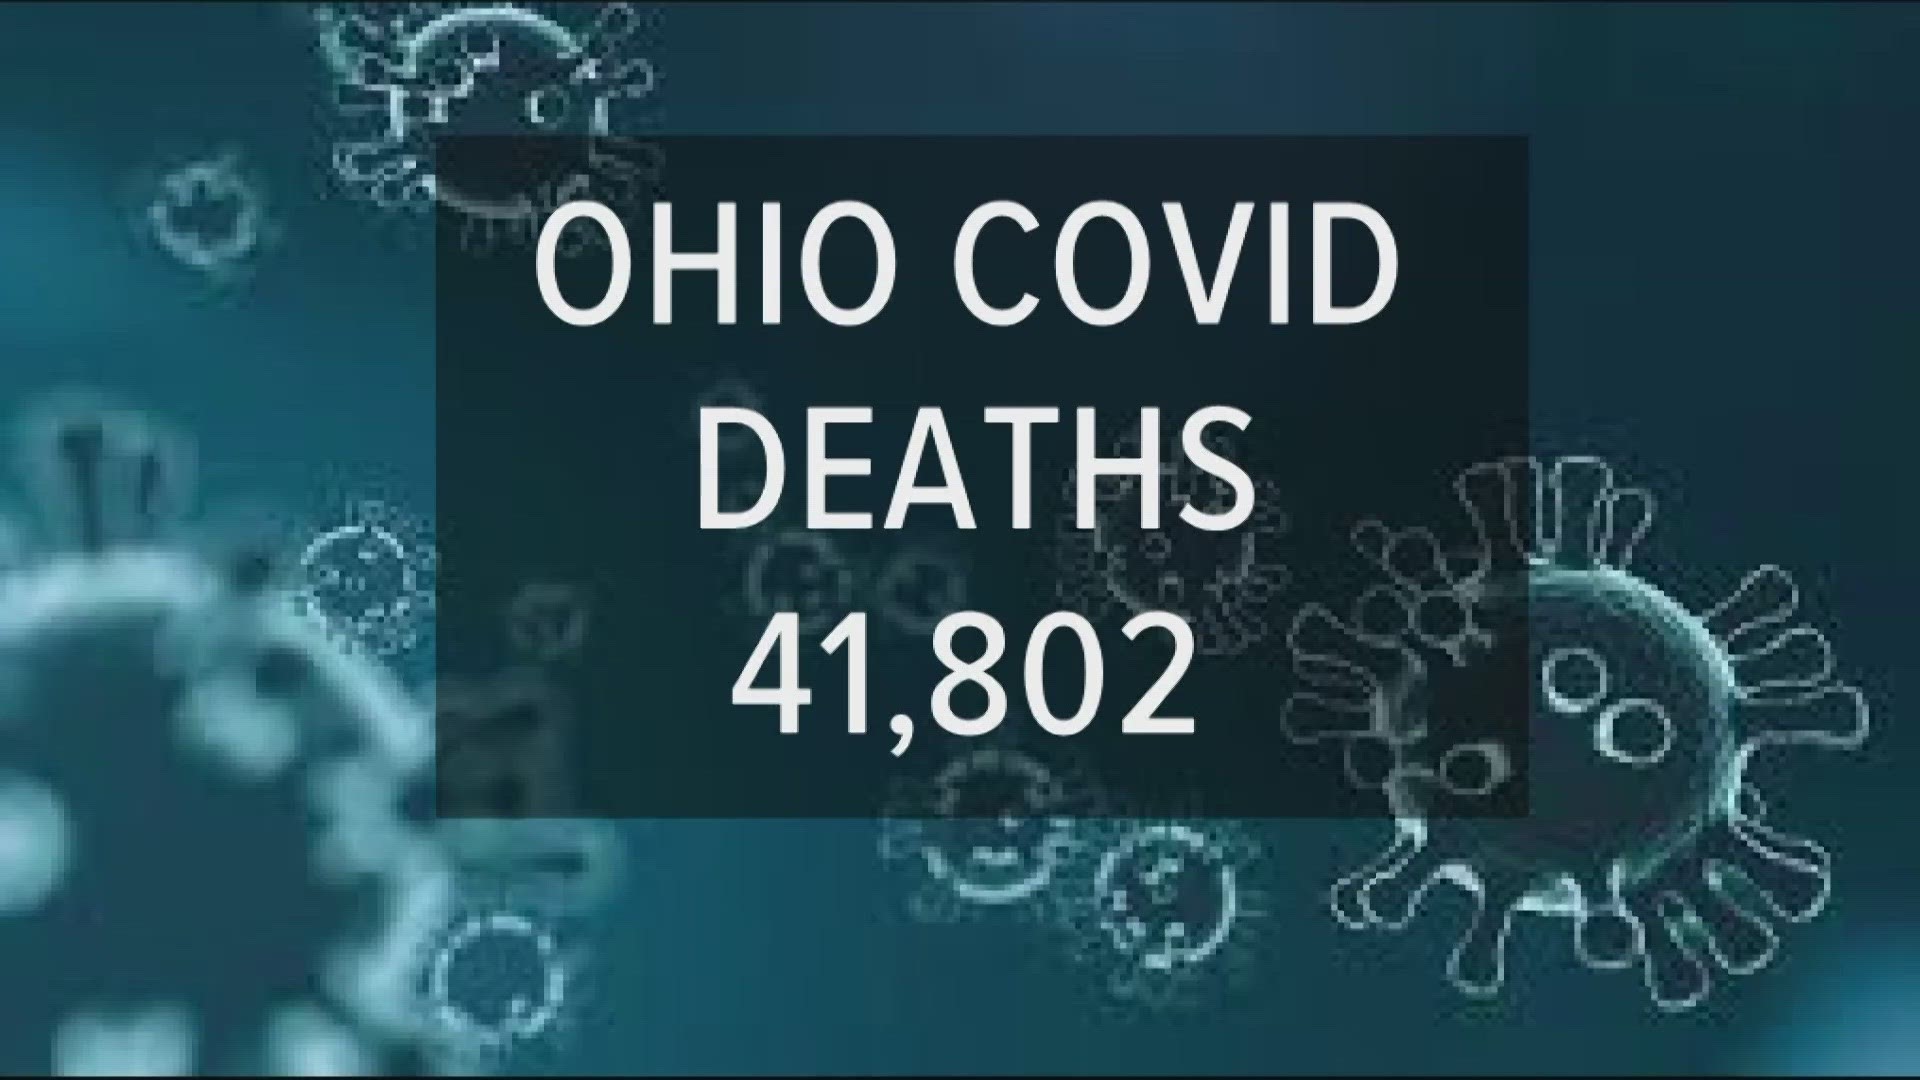 More than 41,000 Ohioans have died from the virus since March of 2020, according to the state department of health.